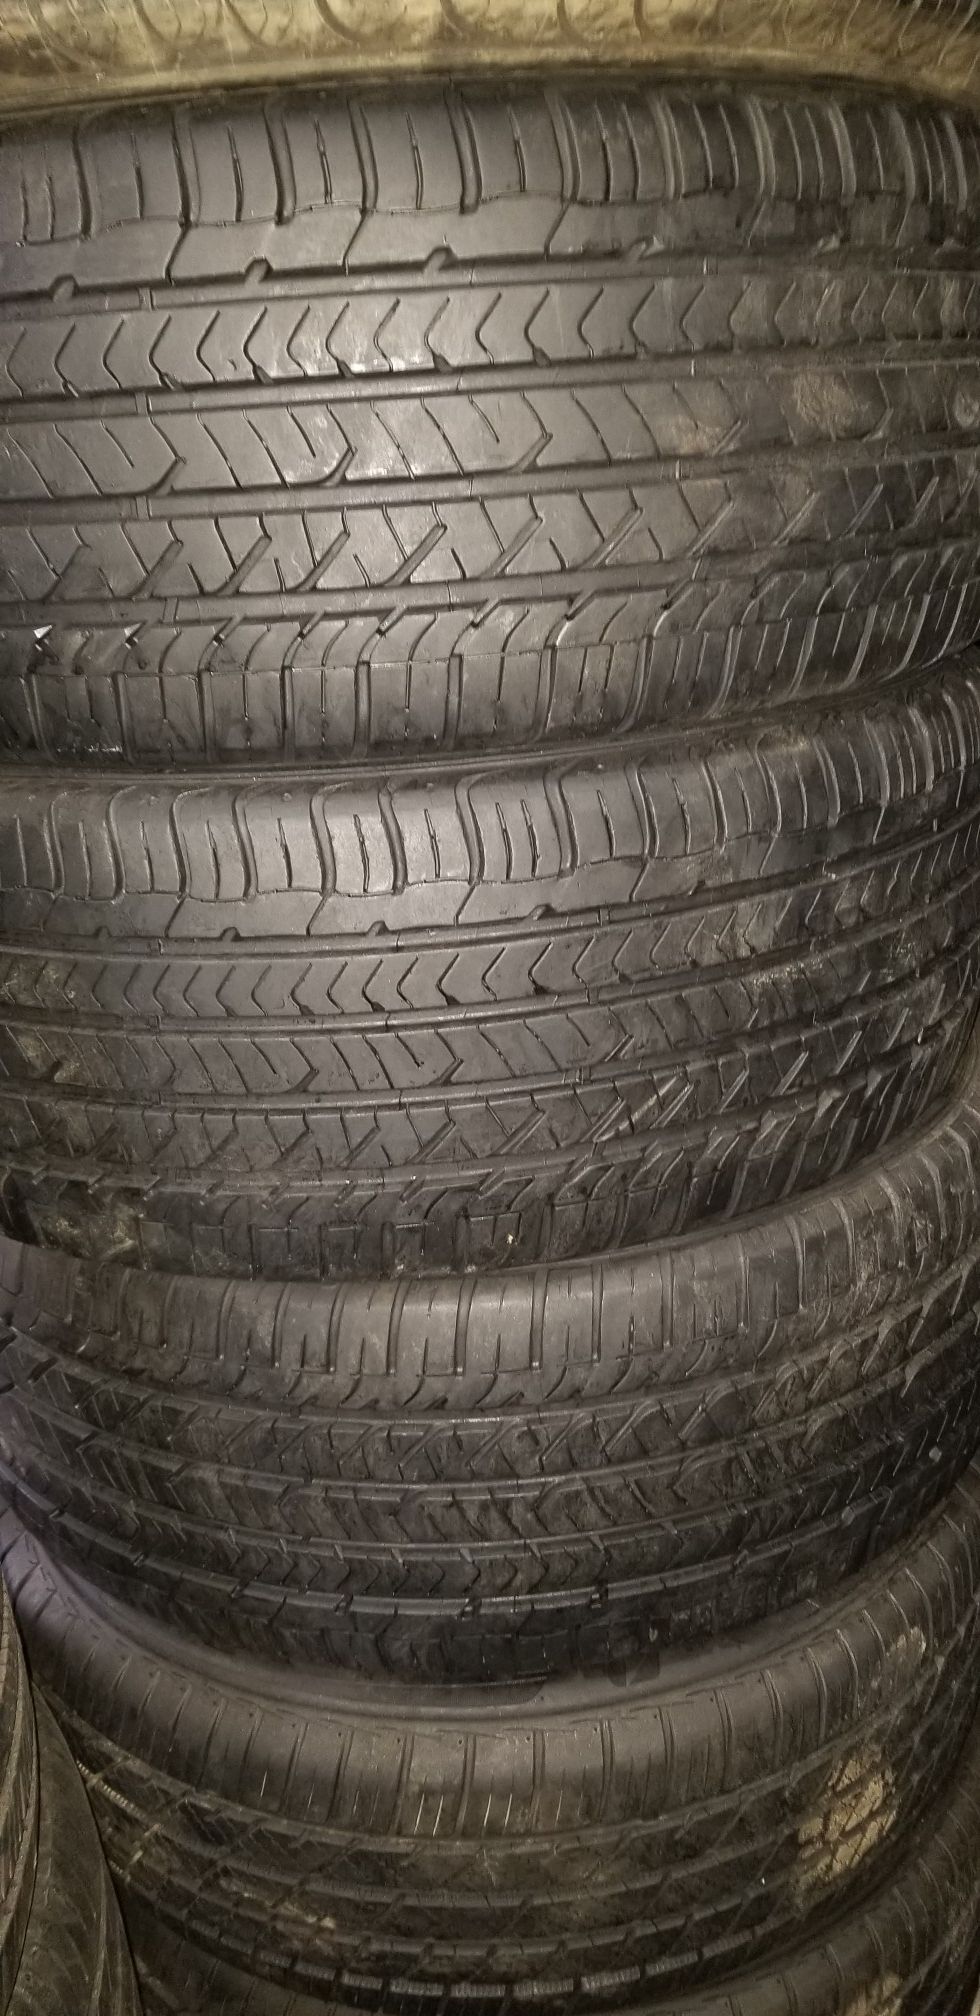 A set of Goodyear tires 225 45 17